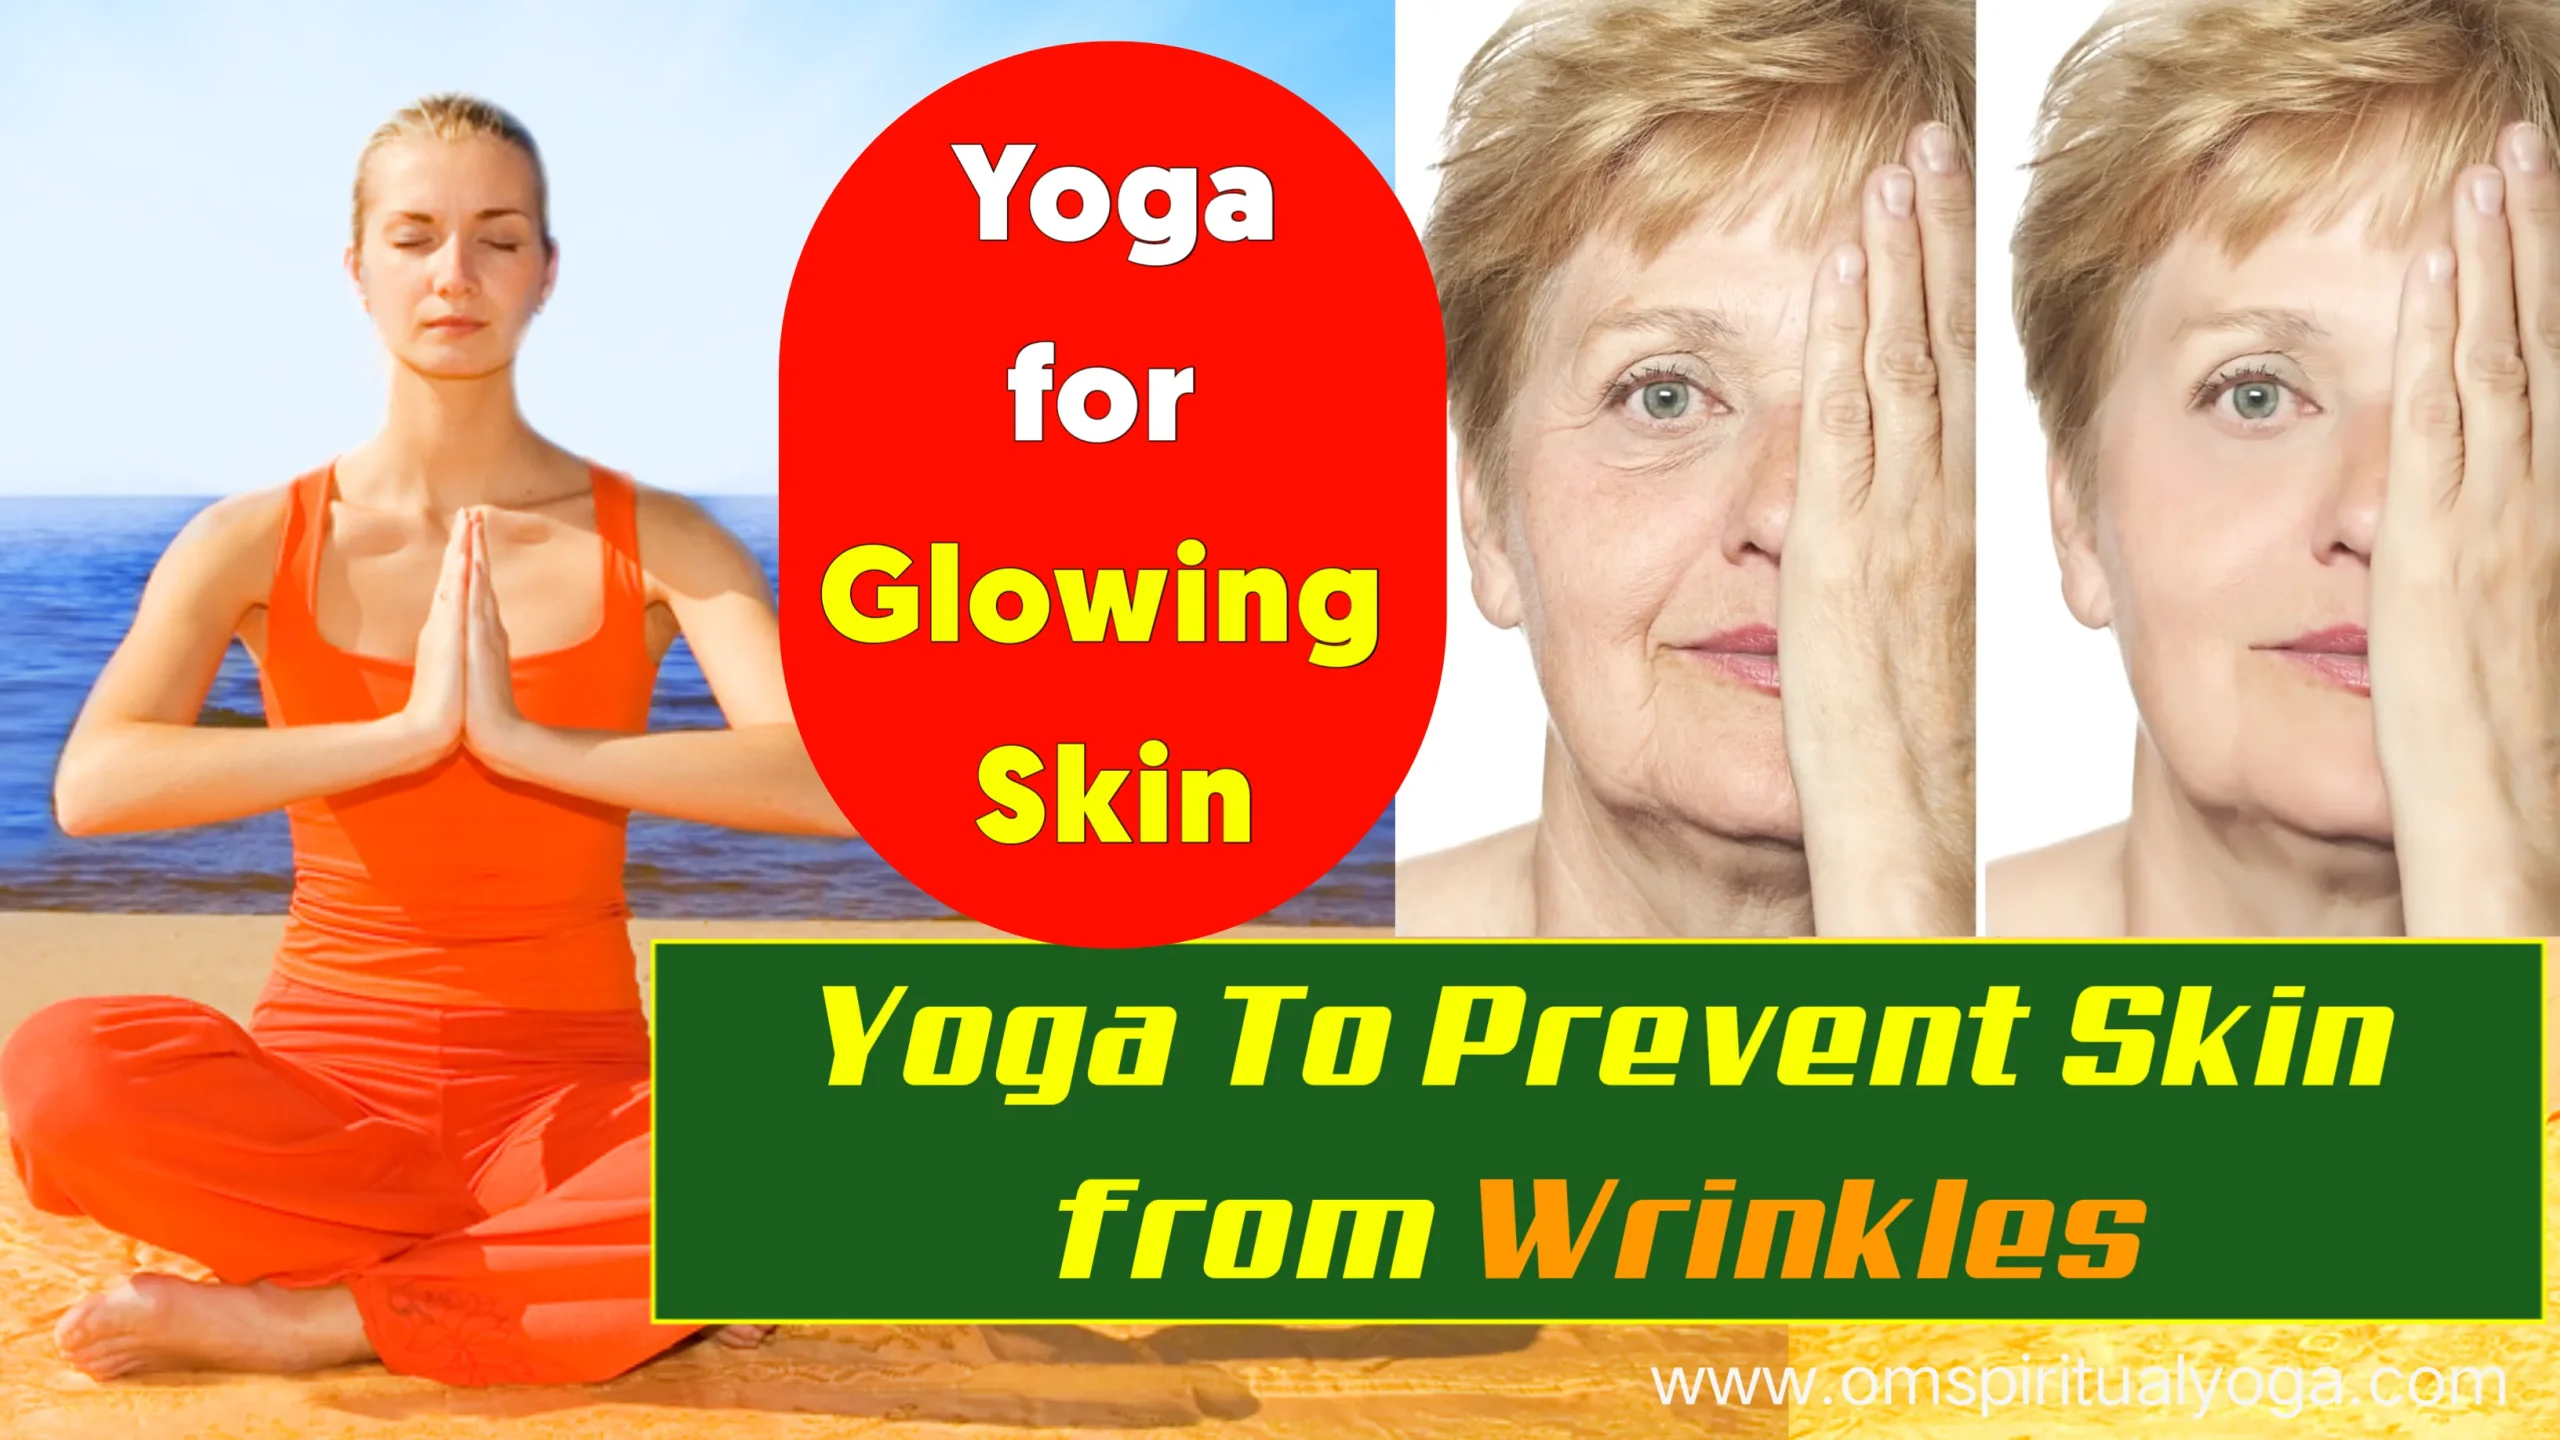 Yoga To Prevent Skin From Wrinkles